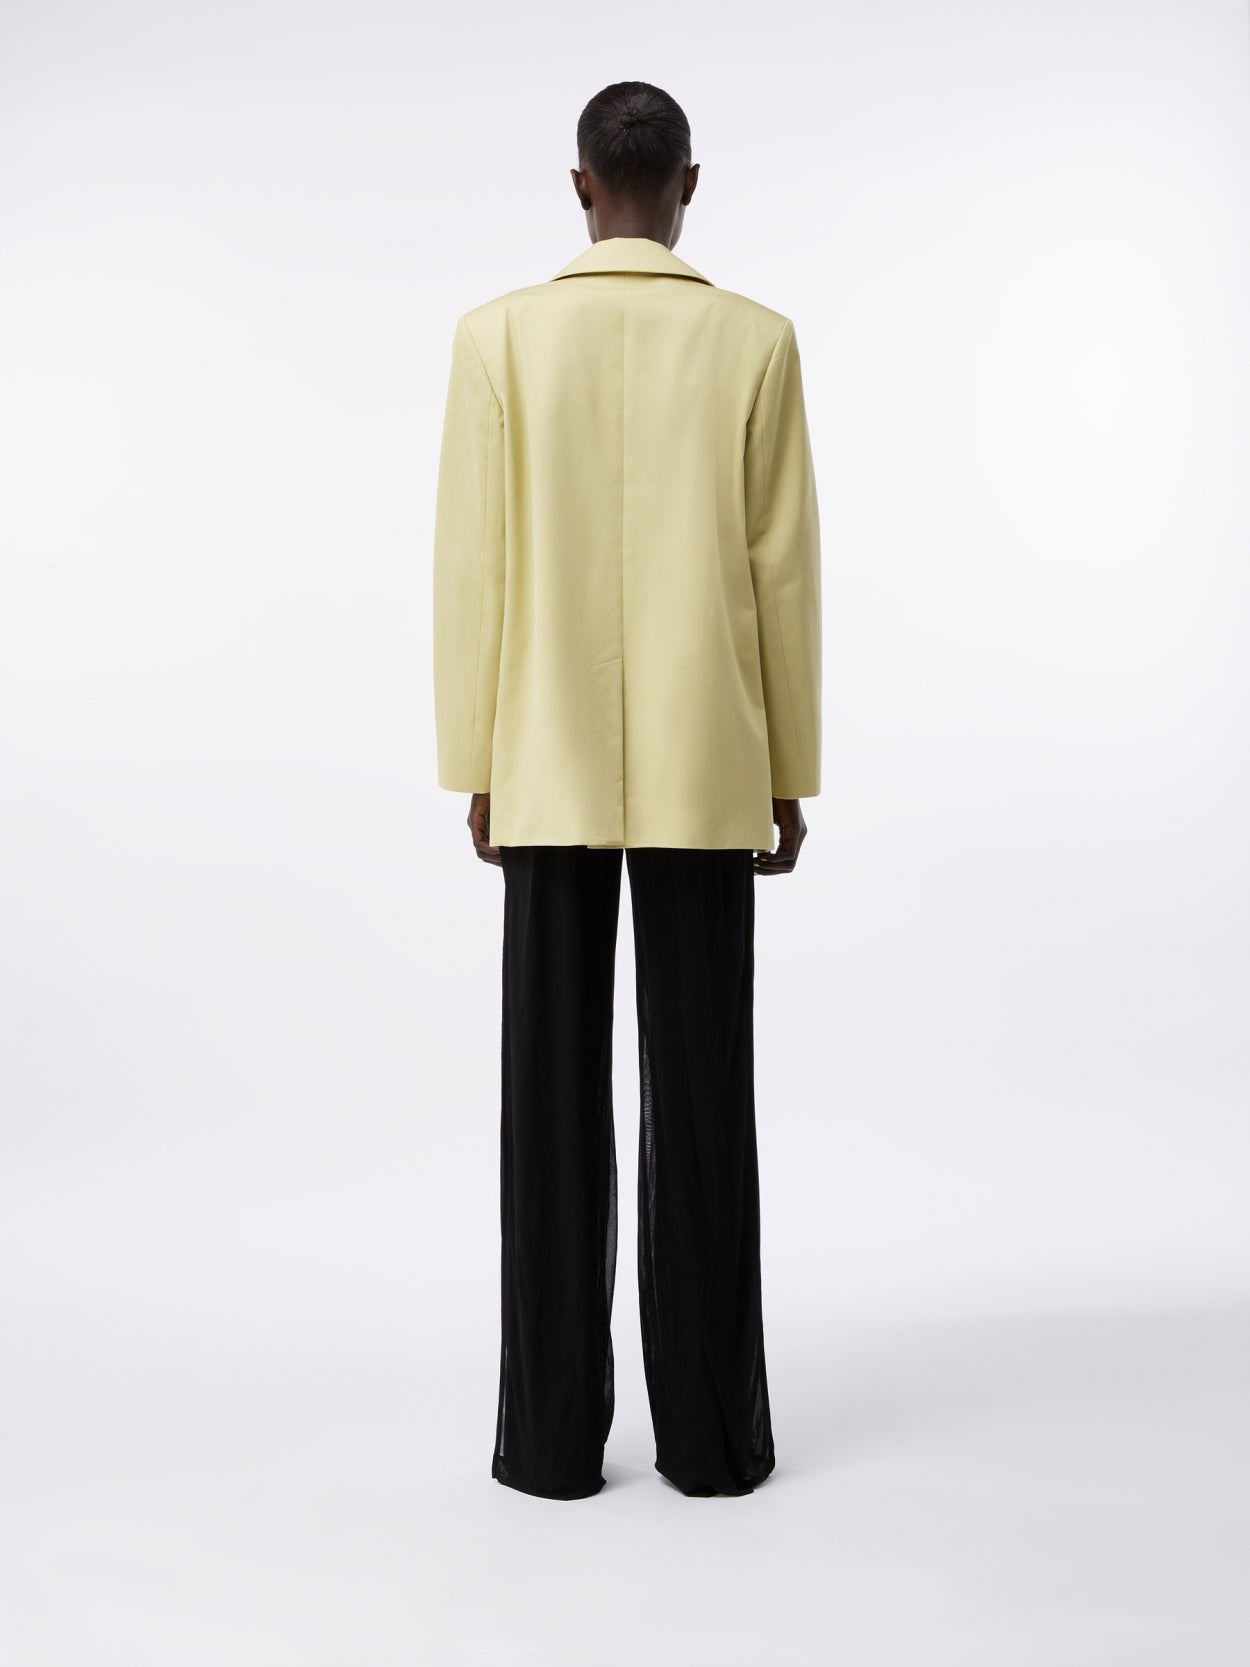 model wearing a pale olive square blazer and draped trousers with twist detail